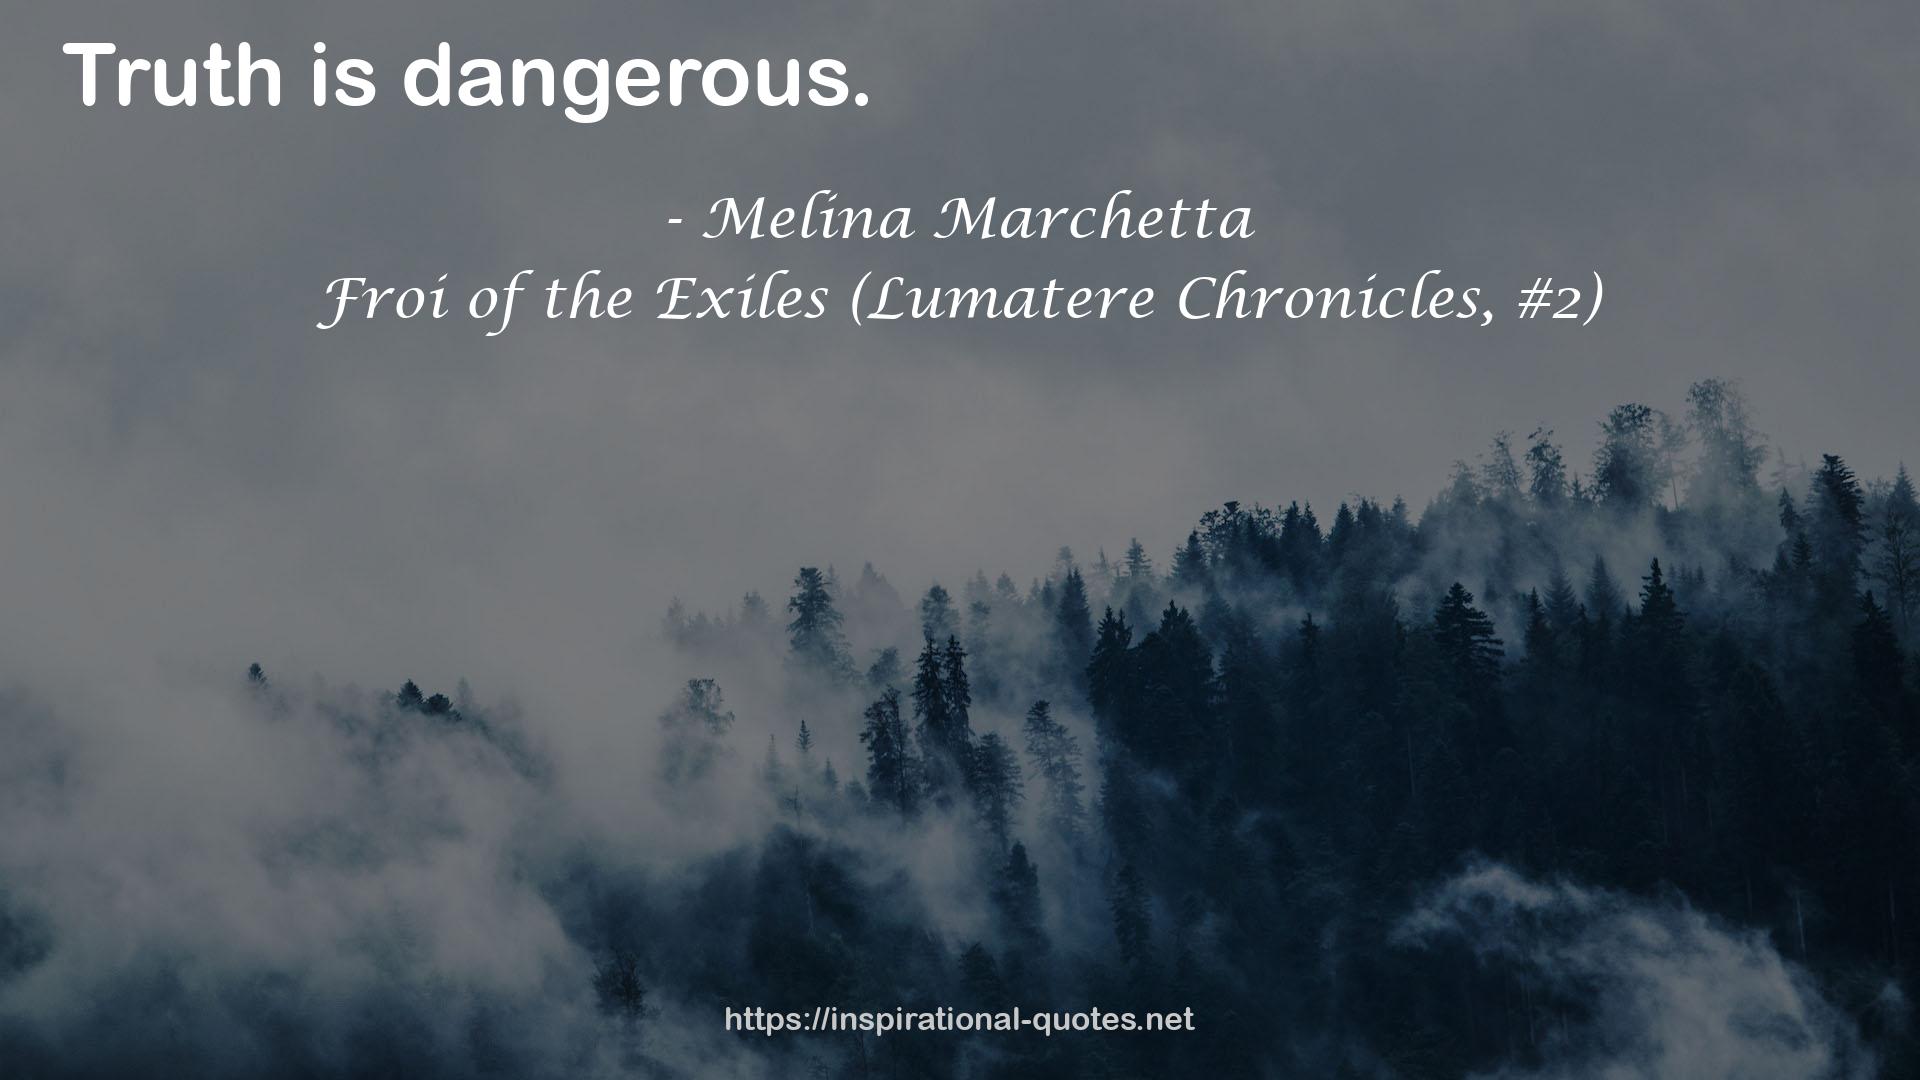 Froi of the Exiles (Lumatere Chronicles, #2) QUOTES